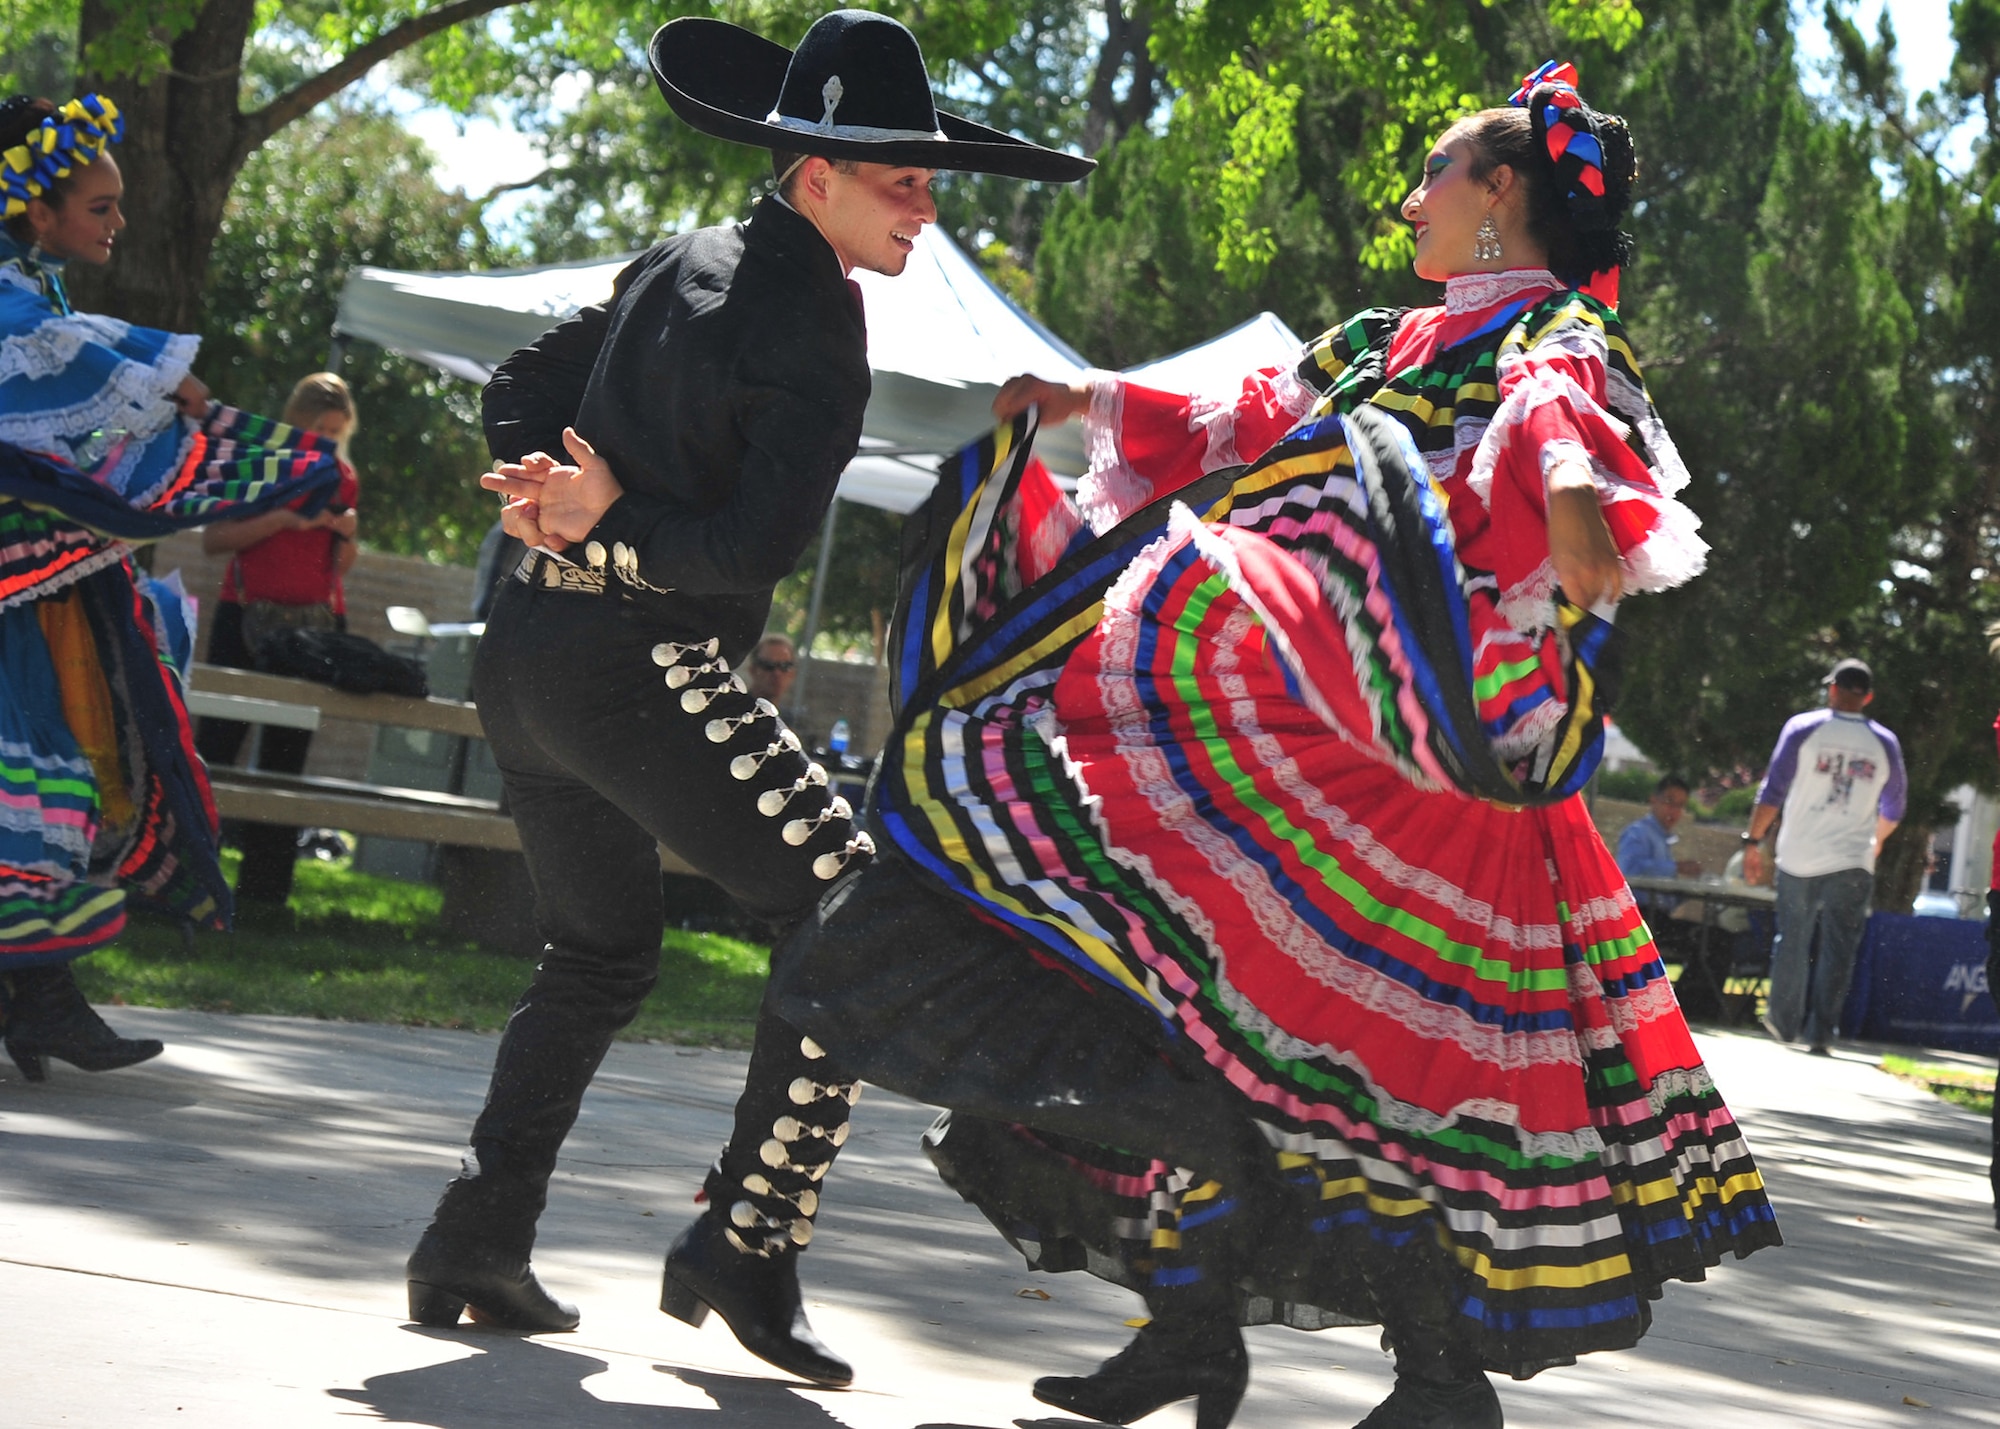 Dancers at the Hispanic Heritage Month festival perform a folkloric dance at Kirtland Air Force Base, N.M., Oct. 3, 2019. Hispanic Heritage Month is celebrated from Sept. 15 to Oct. 15 each year to recognize the contributions of Hispanic and Latino Americans to the country's history, heritage and culture. (U.S. Air Force photo by Airman 1st Class Ireland Summers)